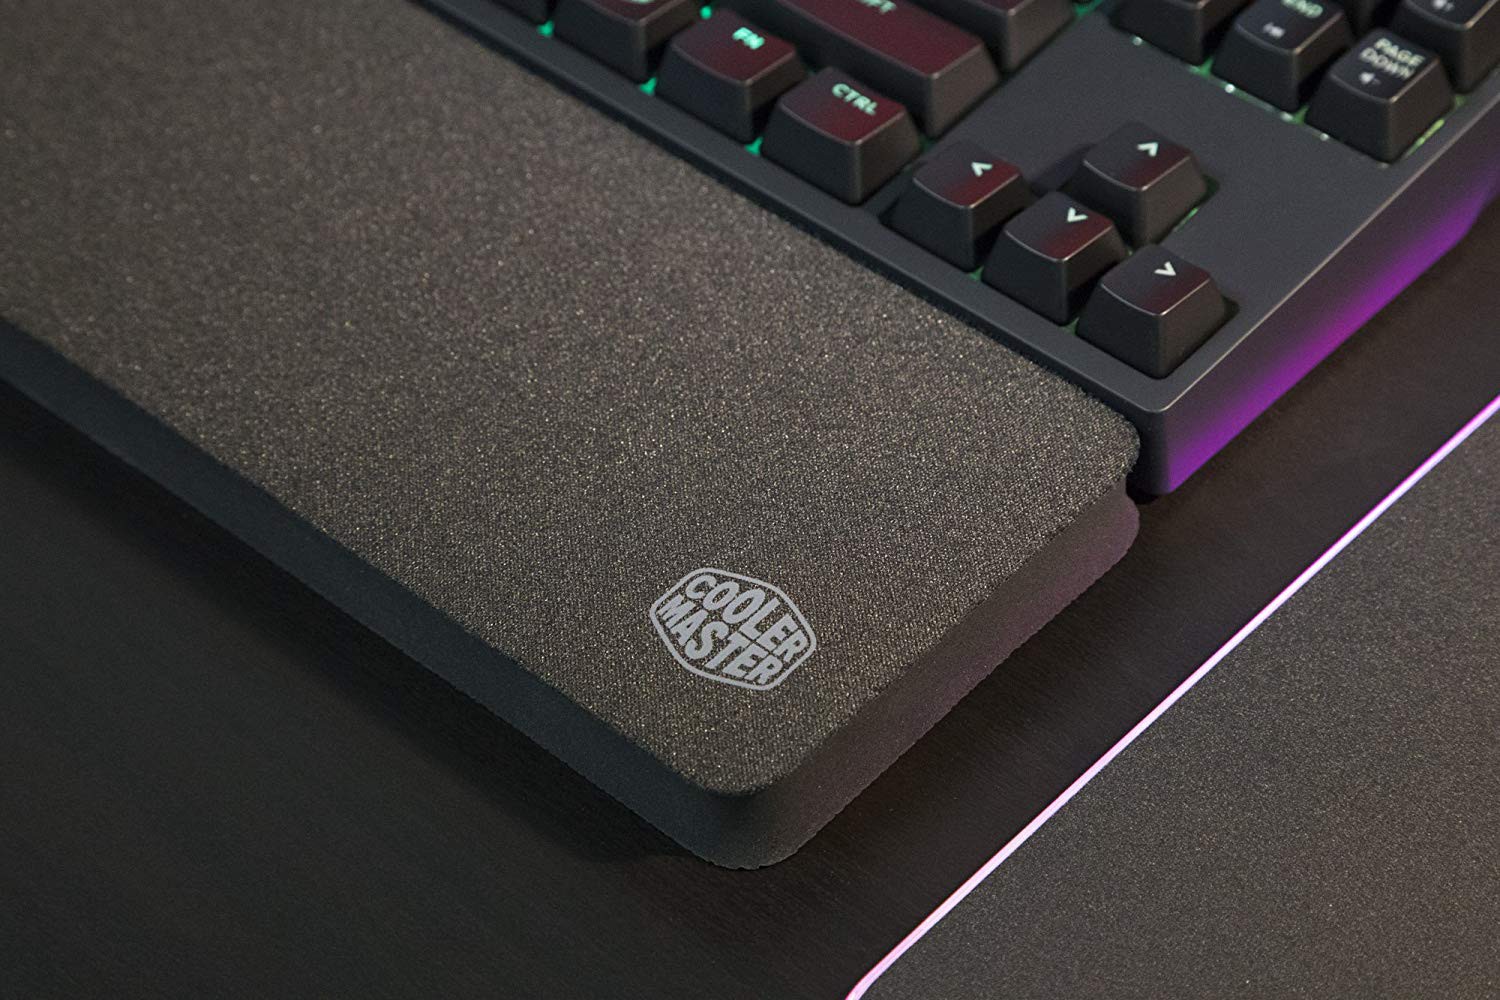 COOLER MASTER MASTERACCESSORY WR530 SIZE L WRIST REST PAD FOR KEYBOARD